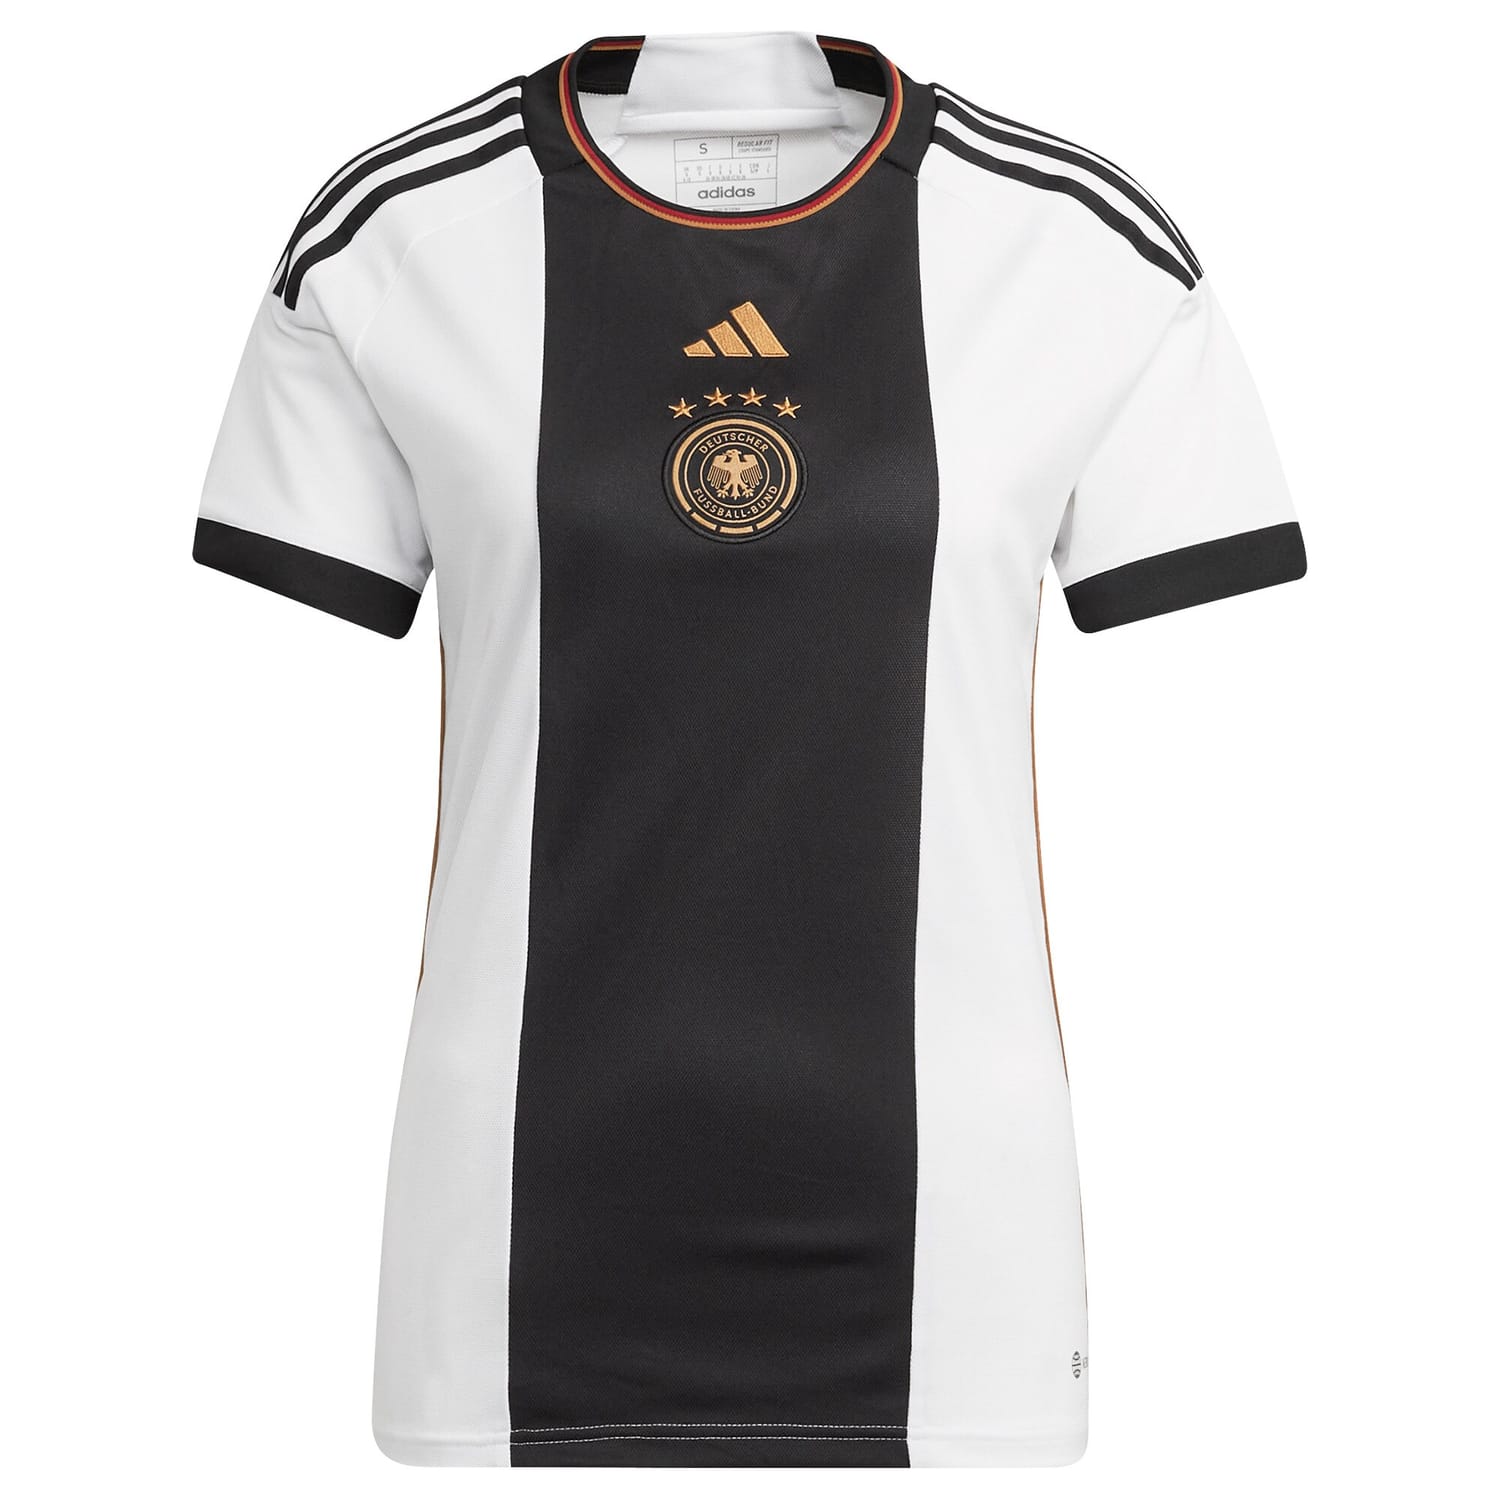 Germany National Team Home Jersey Shirt 2022 player 4 Stars printing for Women